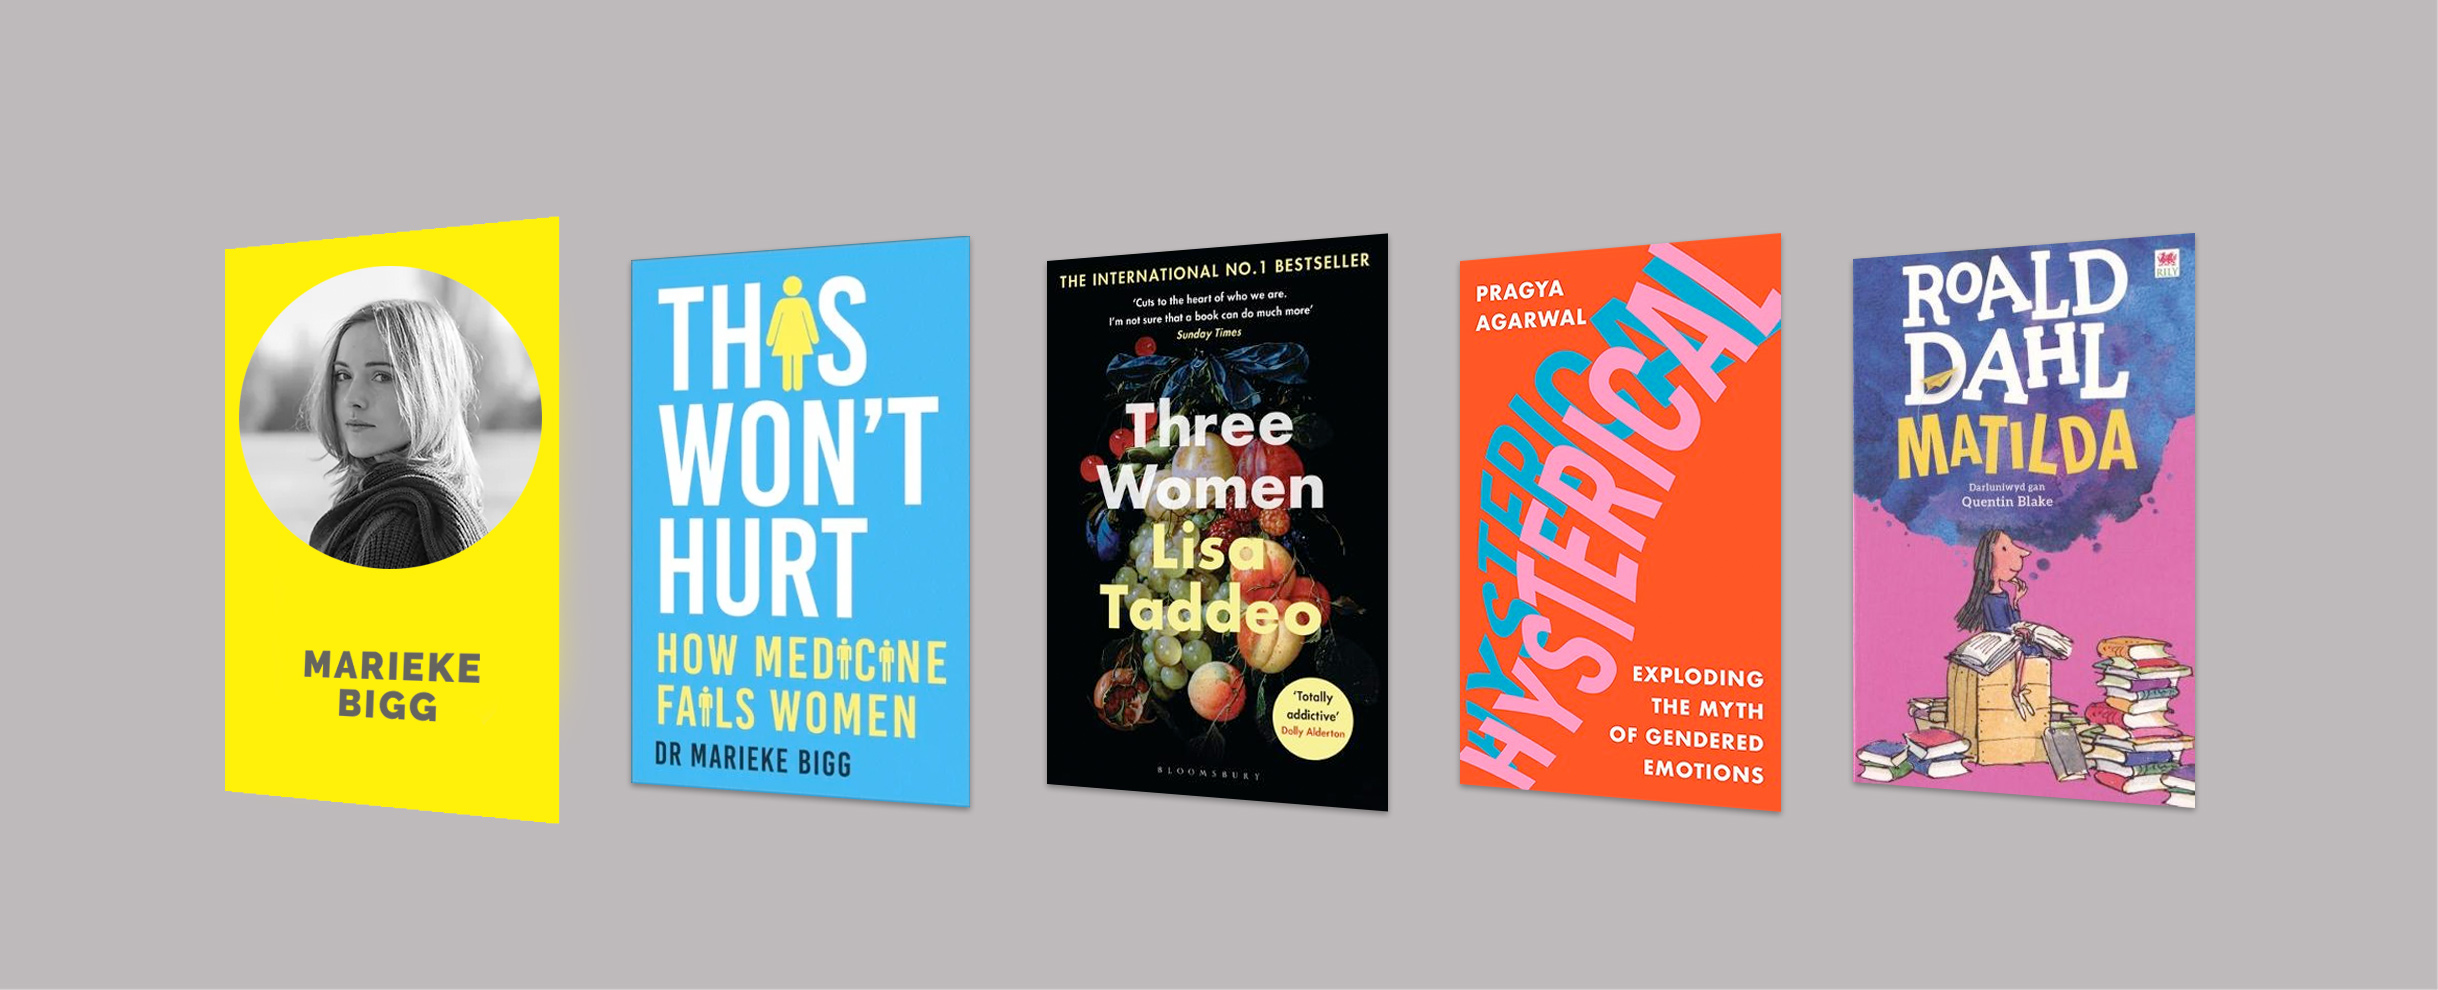 Interview with Marieke Bigg, author of This Won't Hurt: How Medicine Fails Women